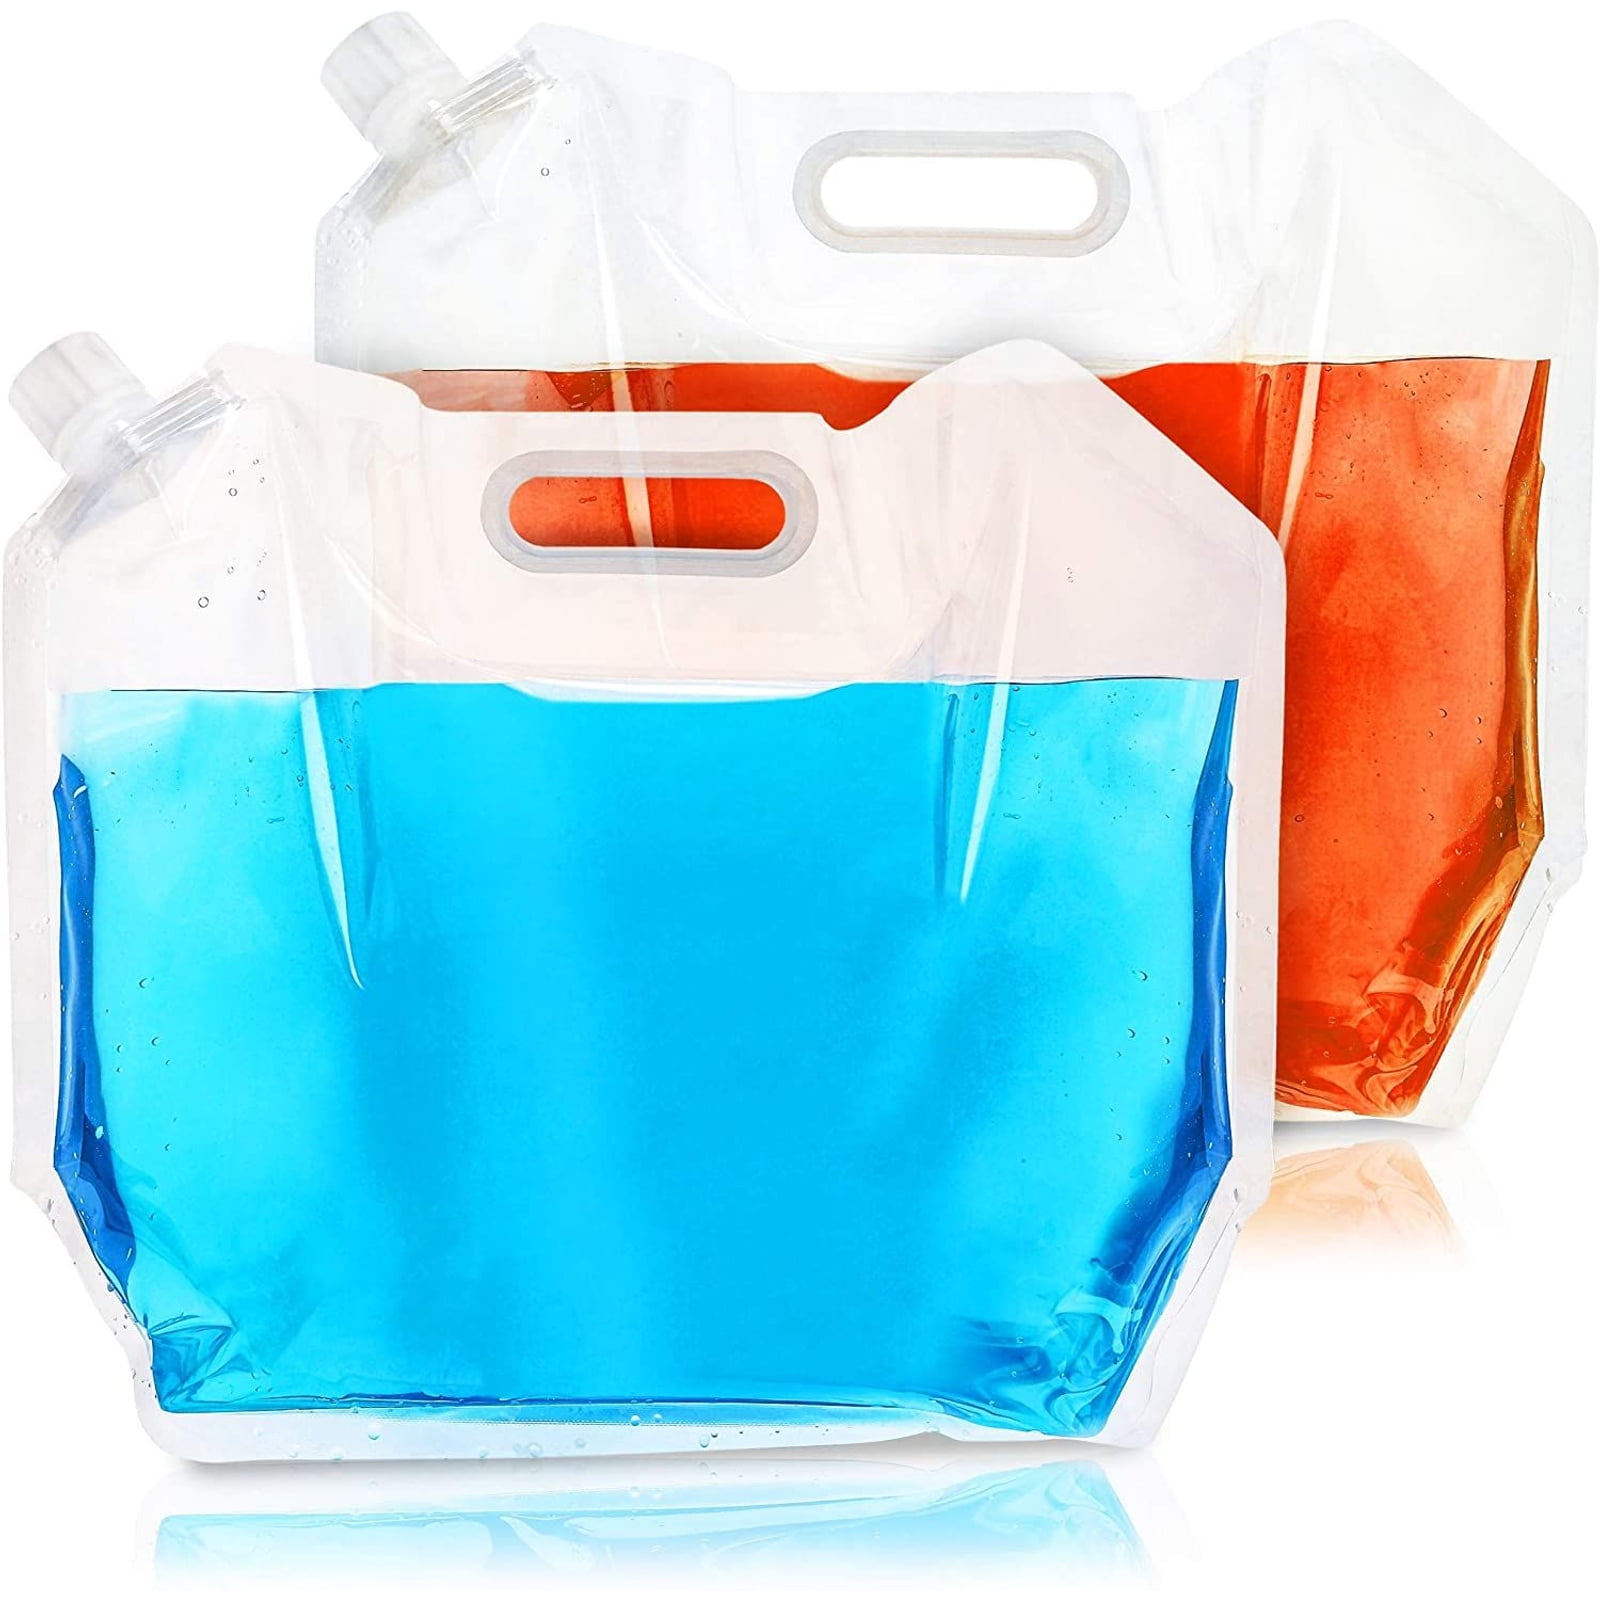 5L 10L Portable Folding Lifting Emergency Camping Water Storage Carrier Bag